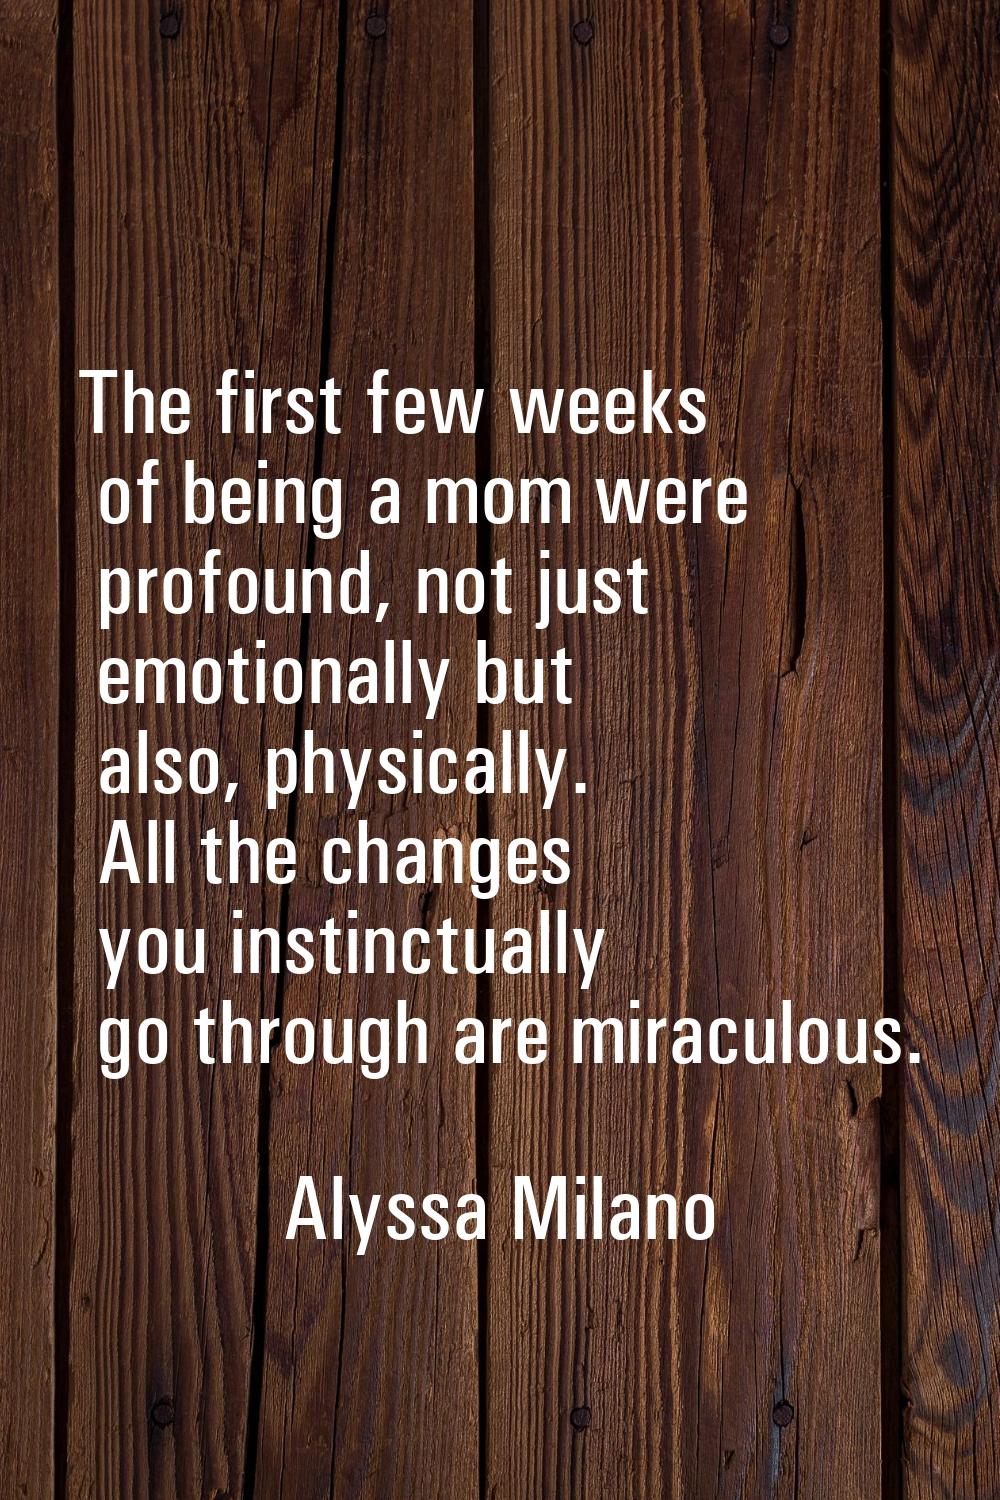 The first few weeks of being a mom were profound, not just emotionally but also, physically. All th